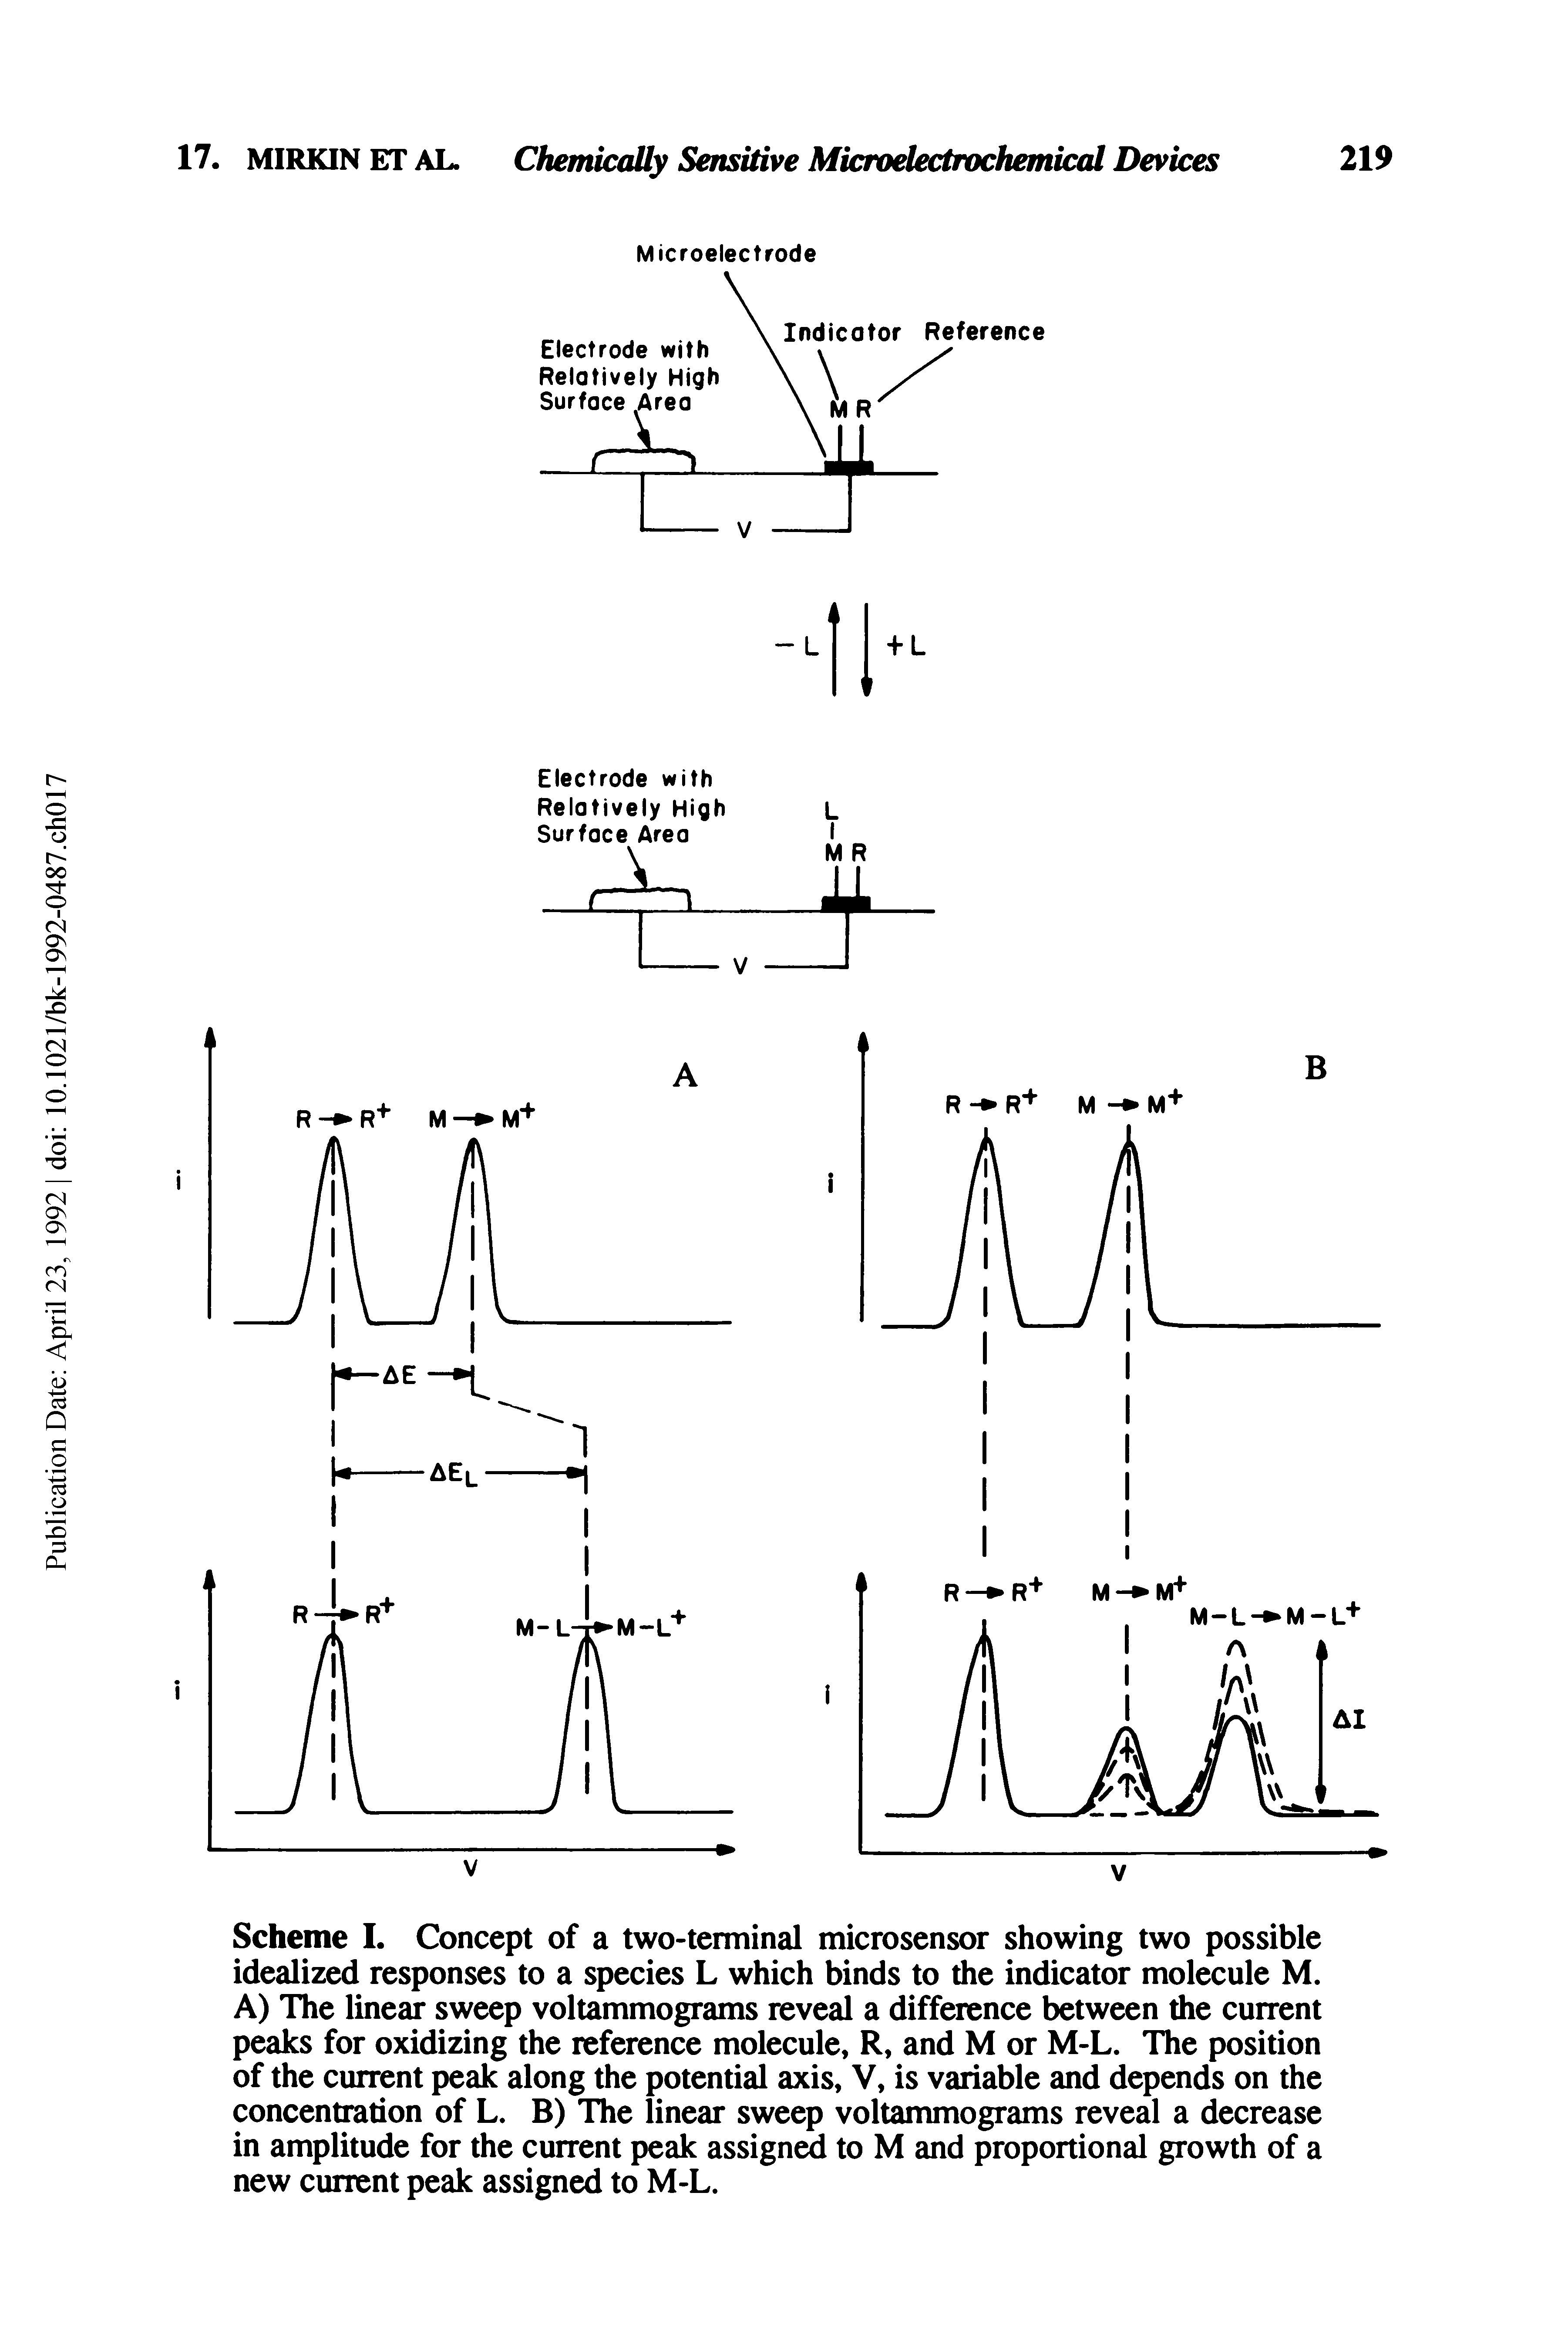 Scheme I. Concept of a two-terminal microsensor showing two possible idealized responses to a species L which binds to the indicator molecule M. A) The linear sweep voltammograms reveal a difference between the current peaks for oxidizing the reference molecule, R, and M or M-L. The position of the current peak along the potential axis, V, is variable and depends on the concentration of L. B) The linear sweep voltammograms reveal a decrease in amplitude for the current peak assigned to M and proportional growth of a new current peak assigned to M-L.